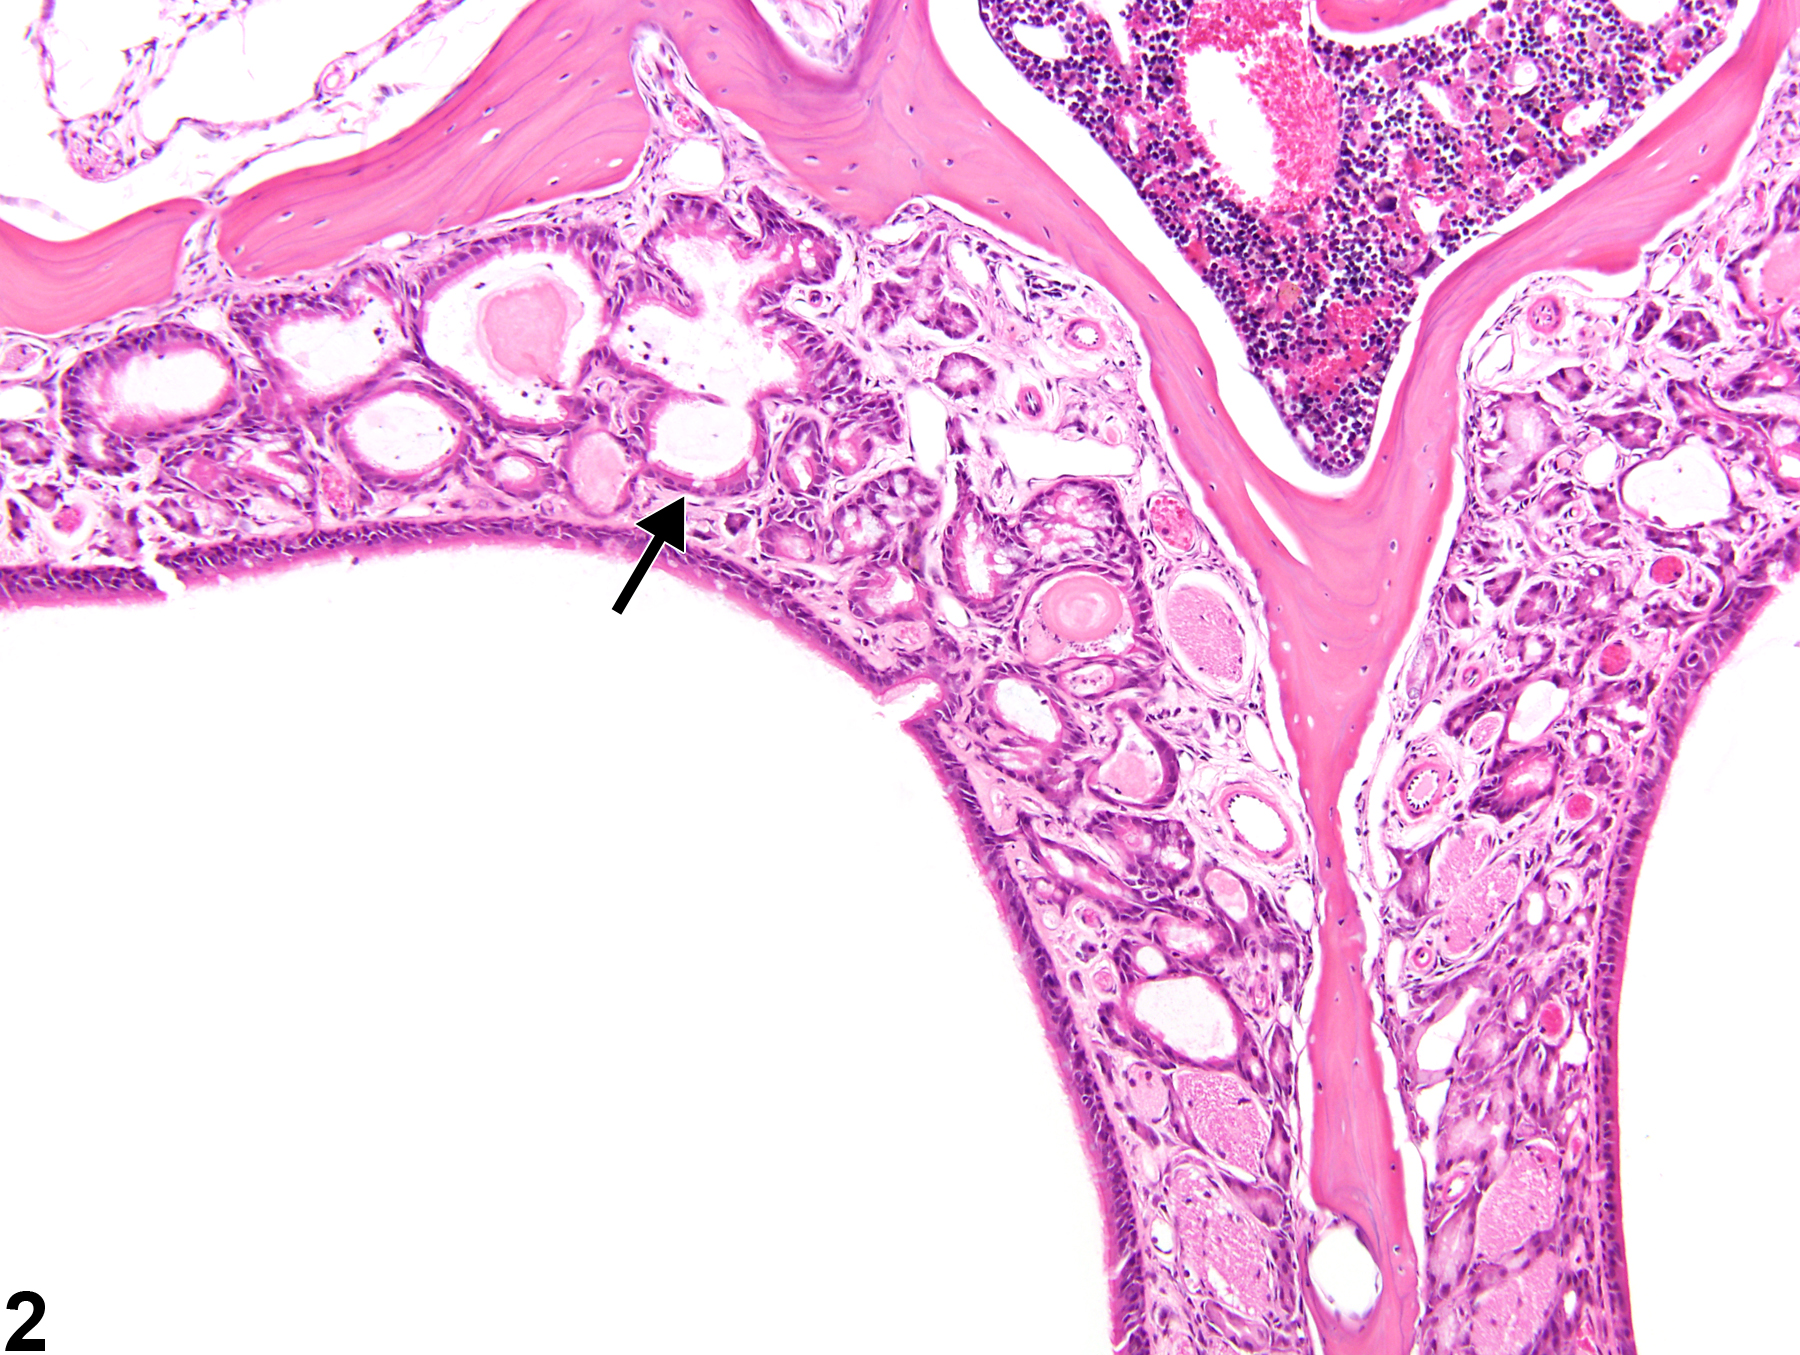 Image of hyperplasia in the nose, olfactory epithelium, glands from a male B6C3F1/N mouse in a chronic study